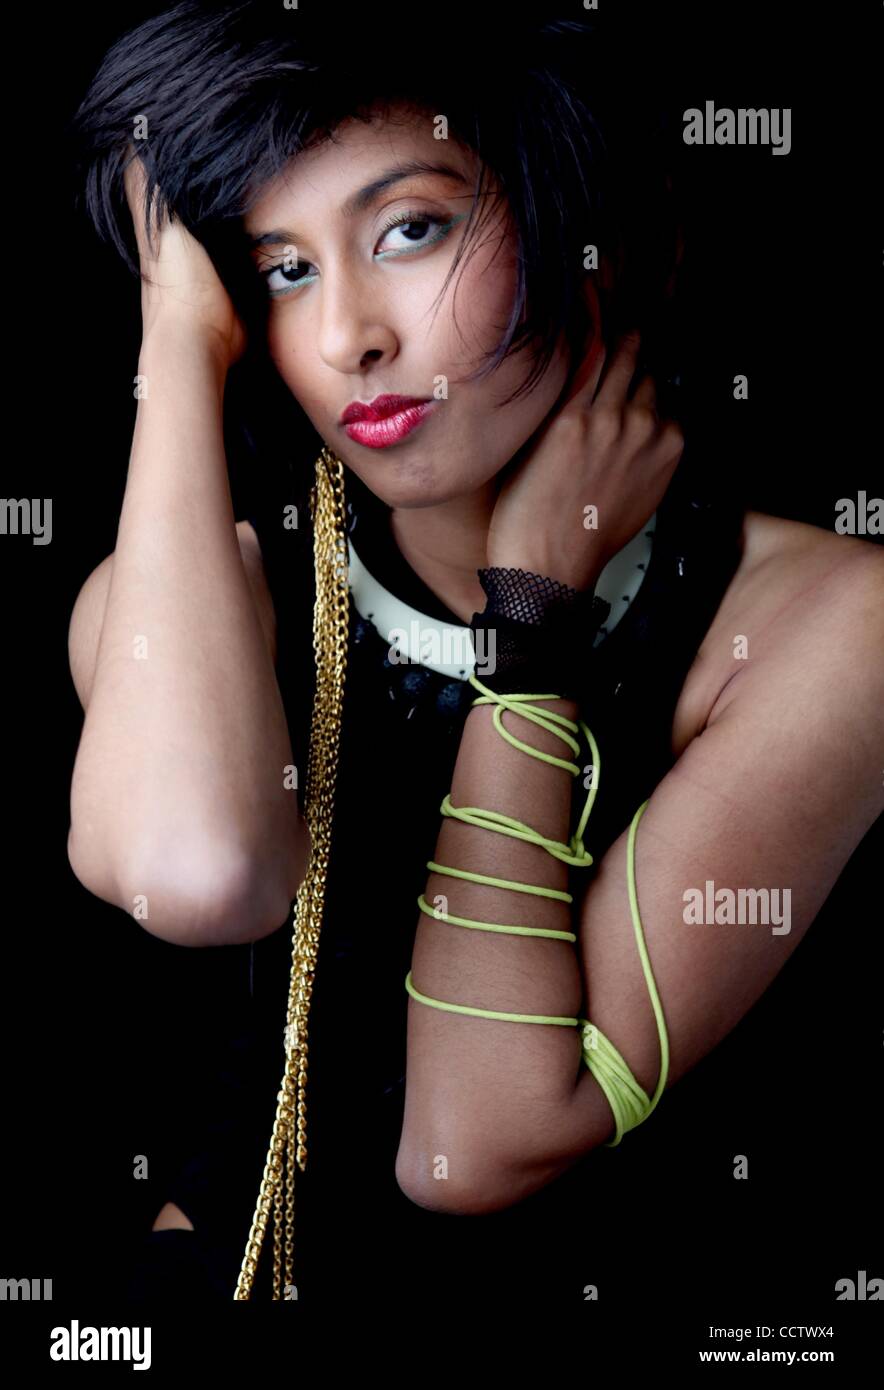 Apr 18, 2010 - Los Angeles, California, USA - Studio Portrait Session of ANJULIE PERSAUD, better known as ANJULIE is a Canadian singer/songwriter from Oakville, Ontario Canada, a suburb outside of Toronto. Anjulie wrote the single 'Don't Call Me Baby' by Canadian recording artist Kreesha Turner whic Stock Photo